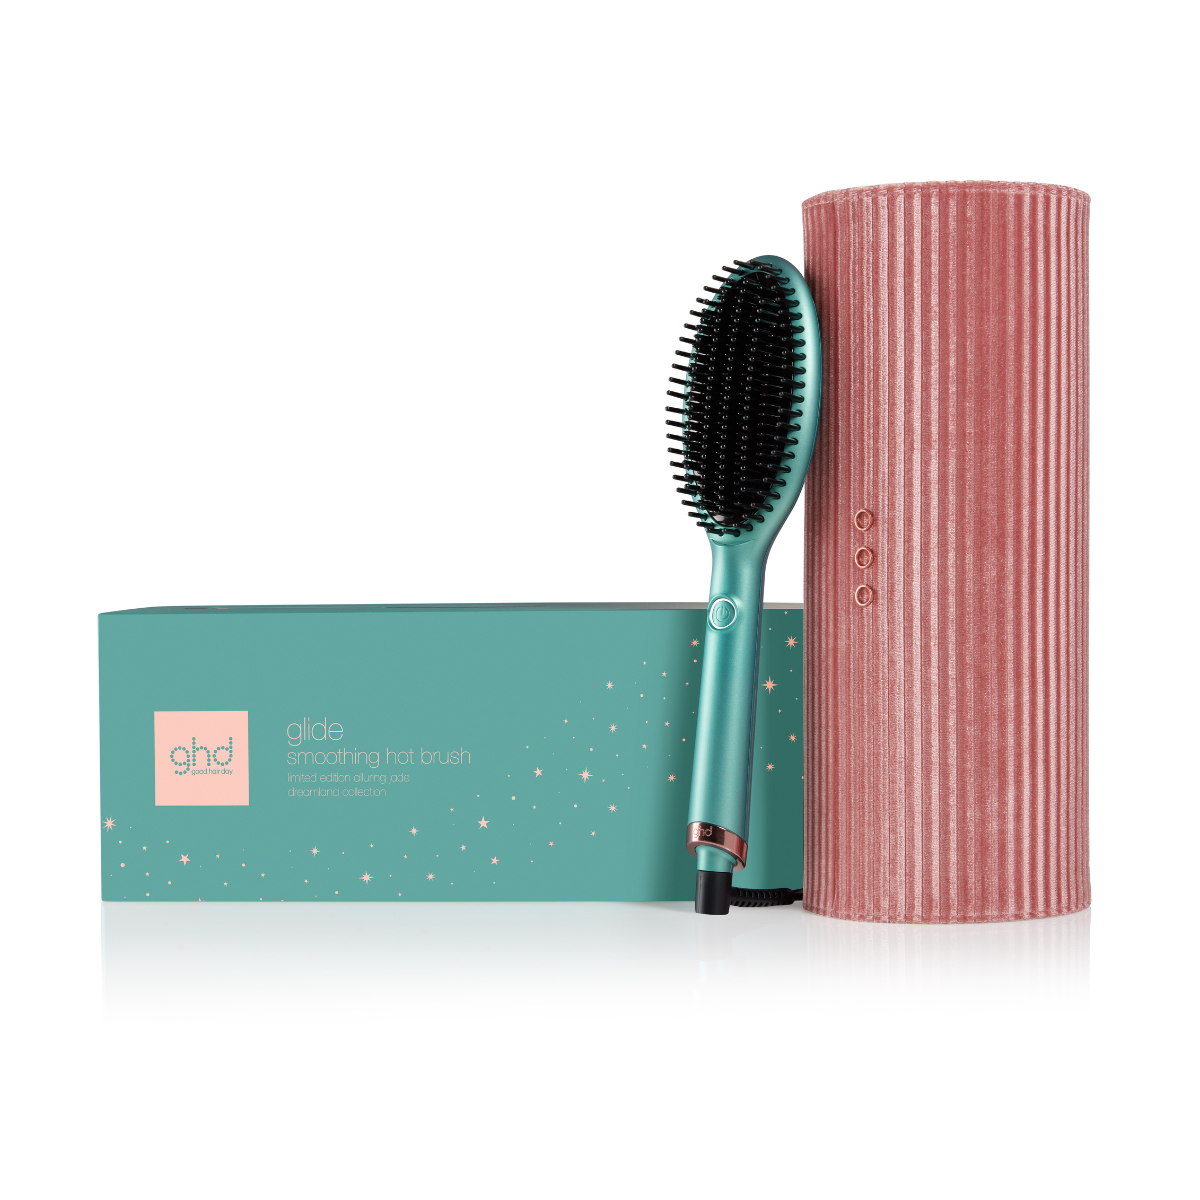 ghd Glide Limited Edition Hot Brush Gift Set in Jade